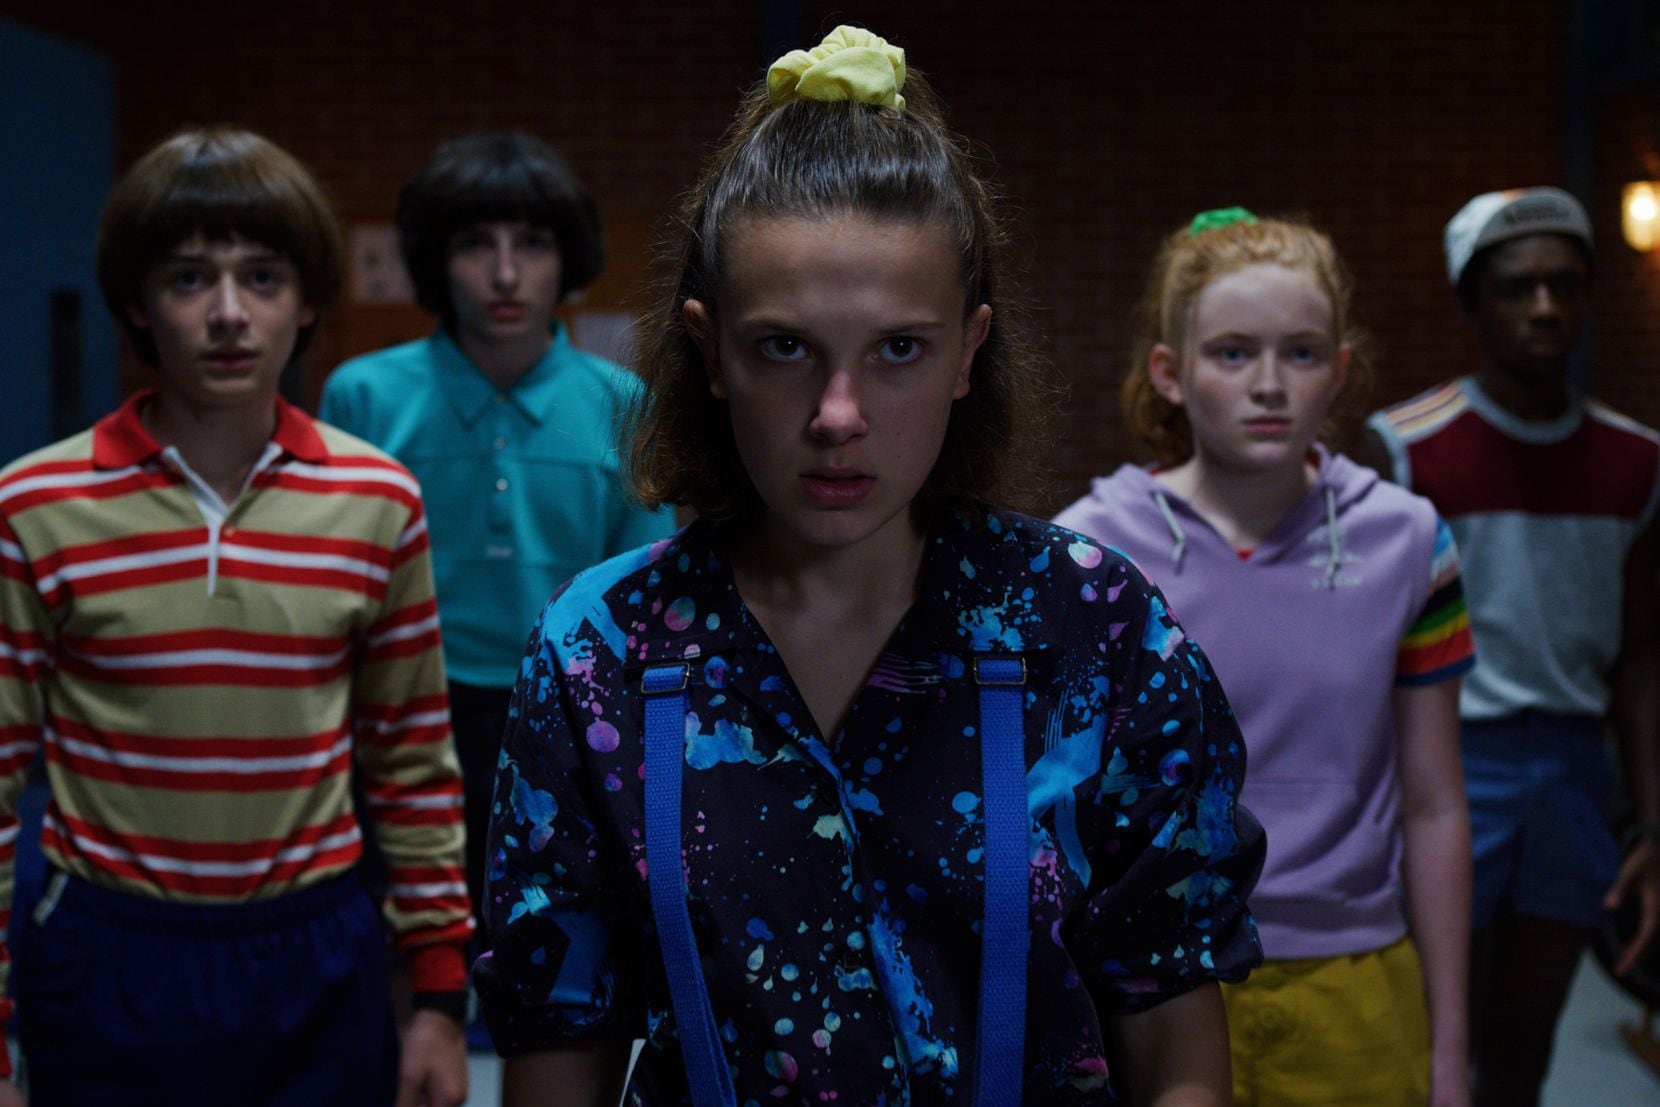 Stranger Things] In episode 3, after the party, Nancy calls Barb's